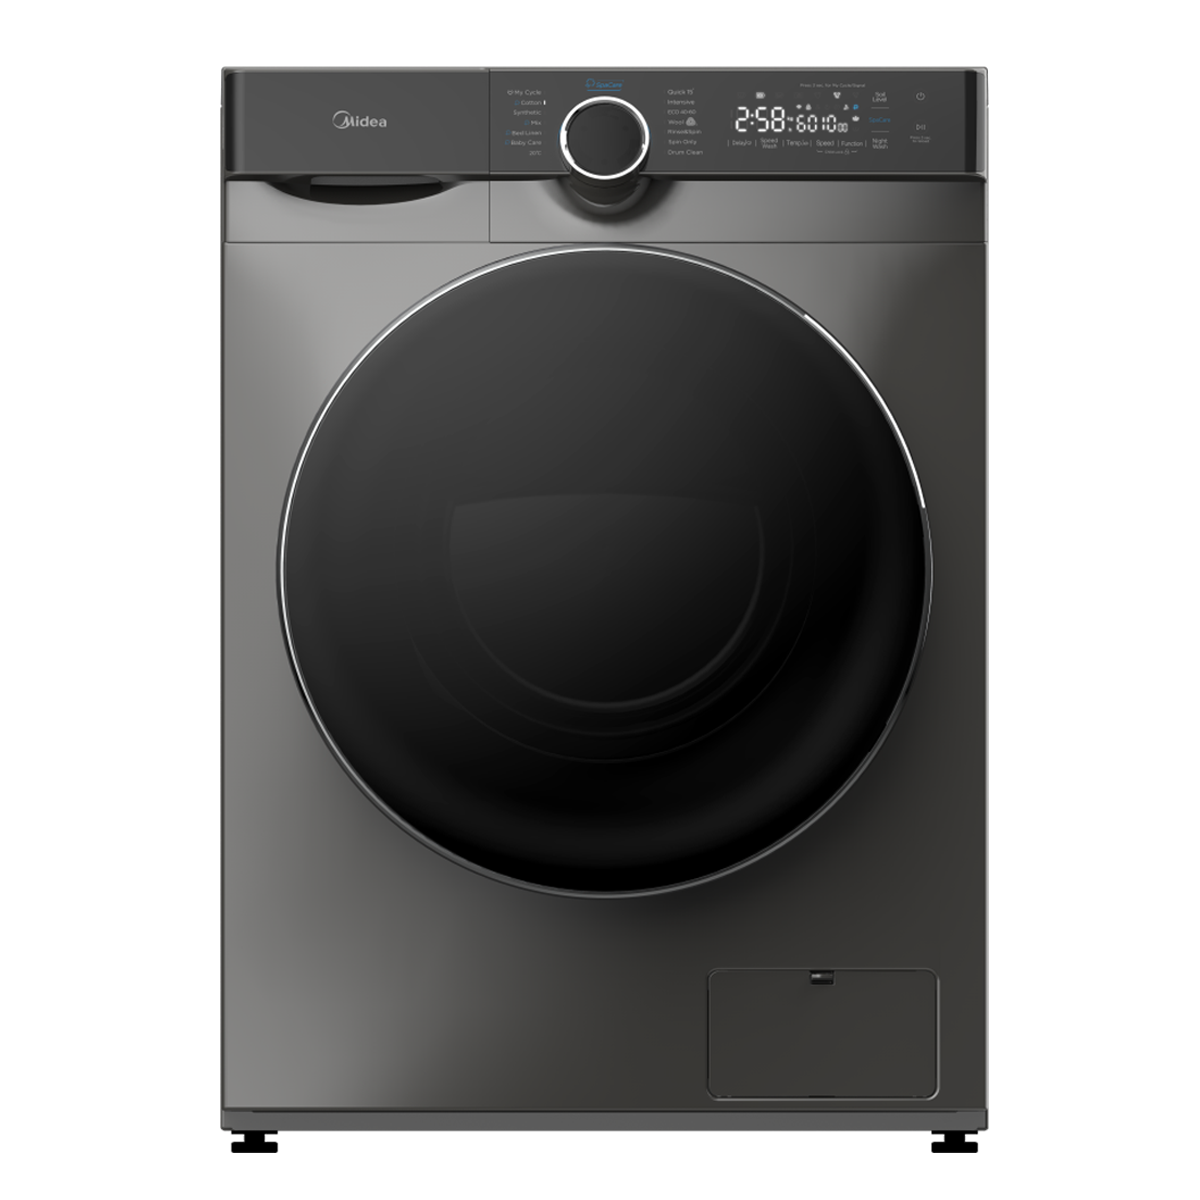 Knight Series 03 Front Loading Washer